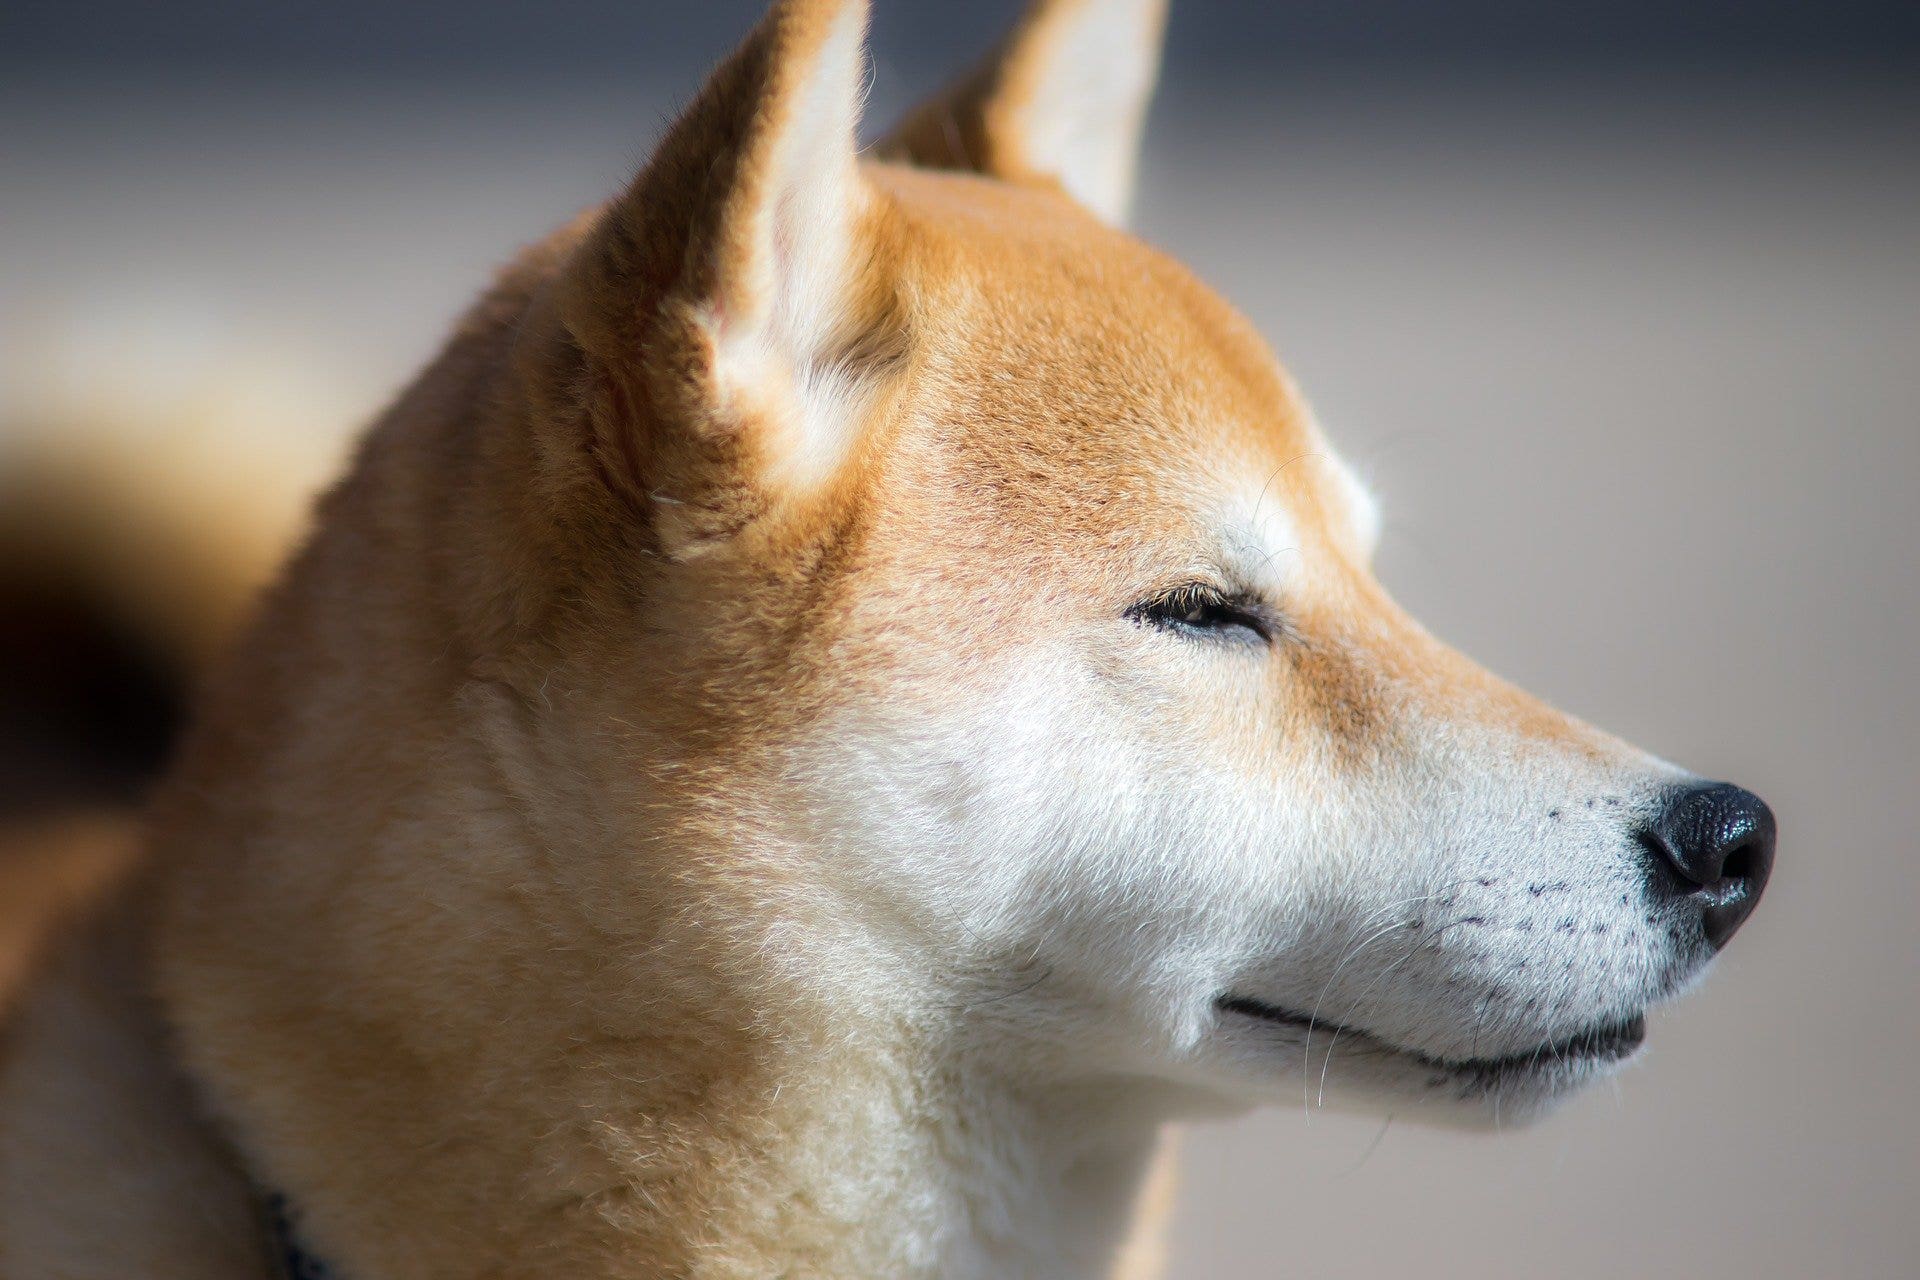 If You Invested $1,000 In Shiba Inu Coin On Jan. 31, 2021, Here's How Much You'd Have Now